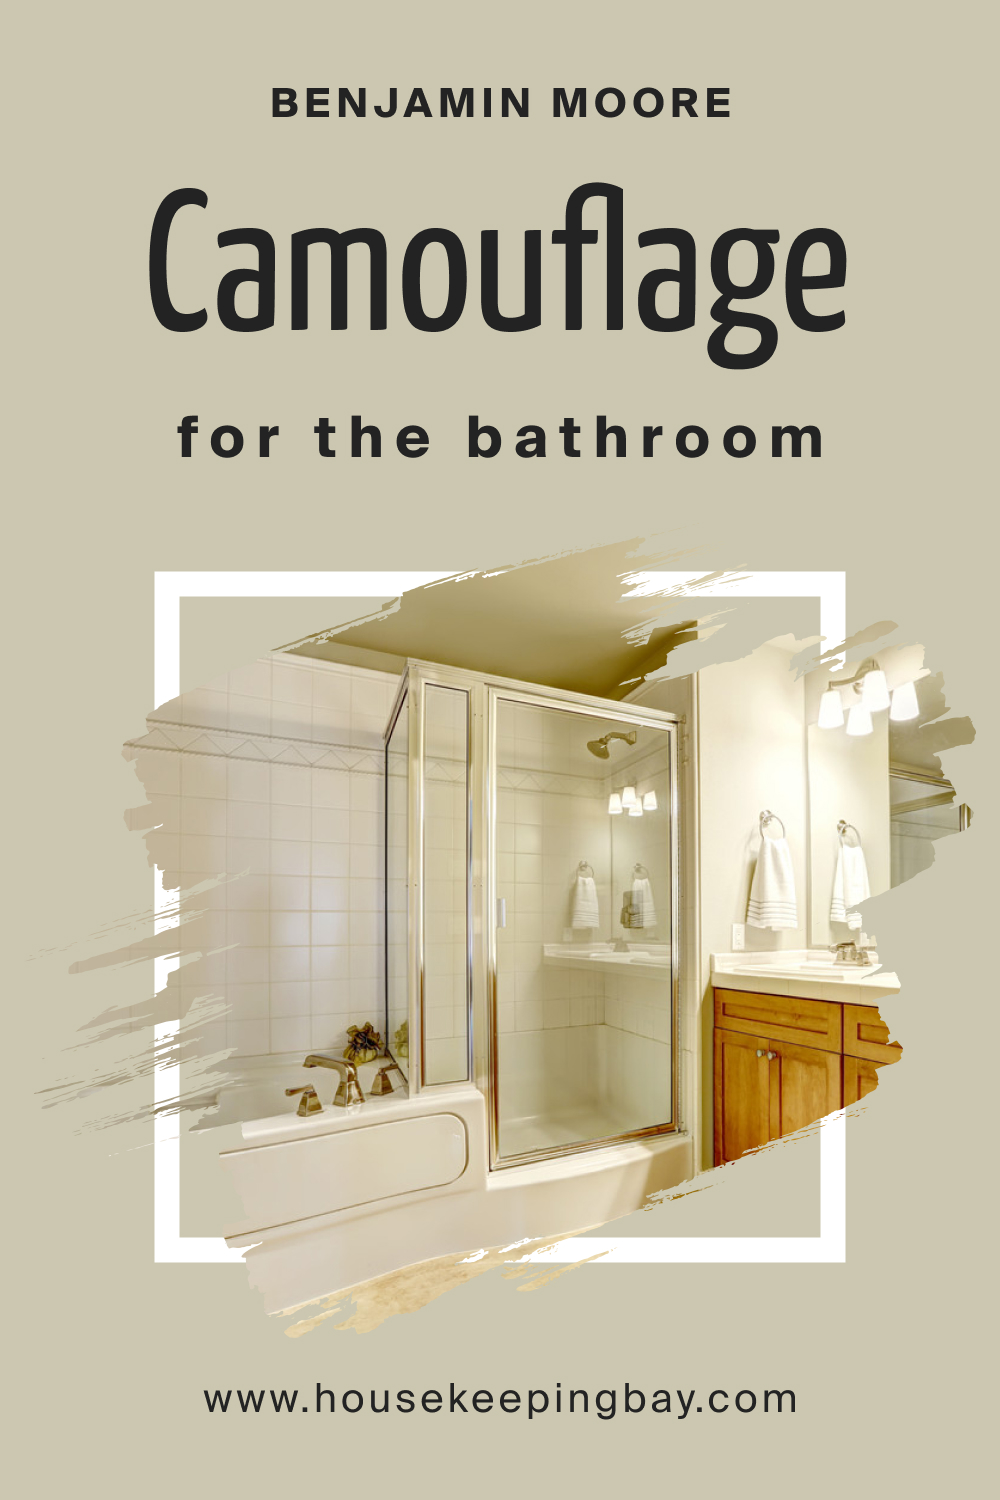 How to Use BM Camouflage 2143-40 in the Bathroom?